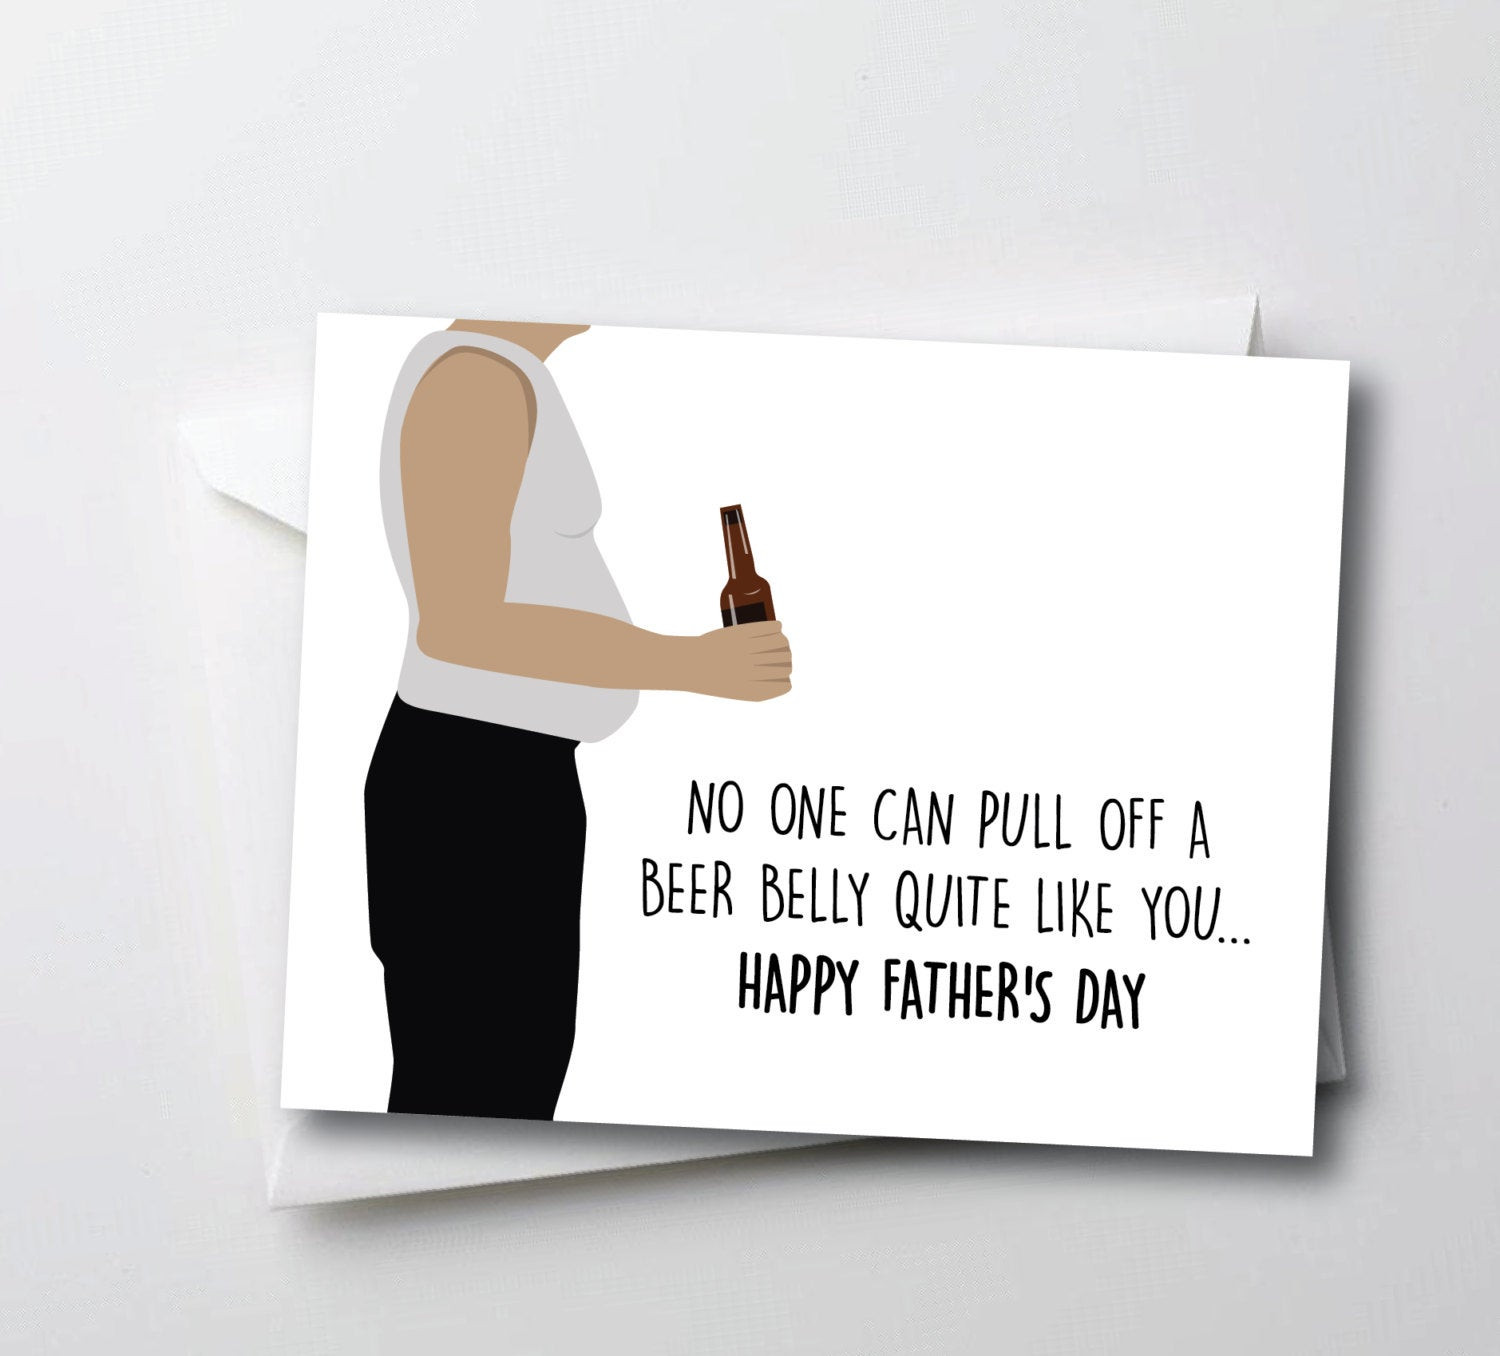 Funny Fathers Day Gifts
 Funny Fathers Day Card Fathers Day Gift No e by TheSourPeach